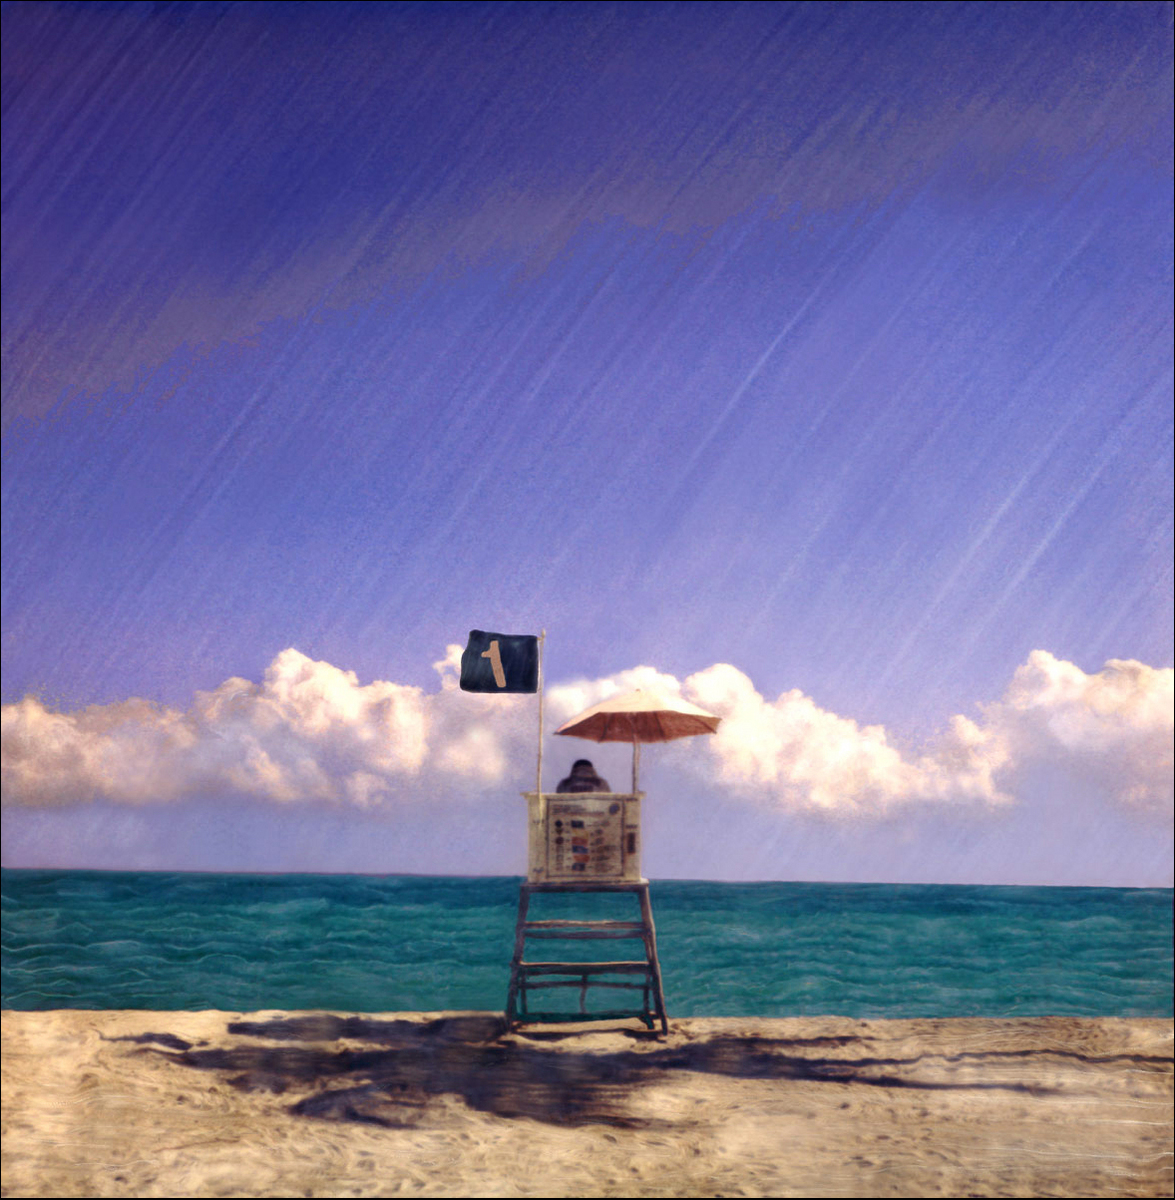 "Lifeguard Stand in Palm Shadow"<br> Rainbow in Blue Sky, Hollywood Beach, FL